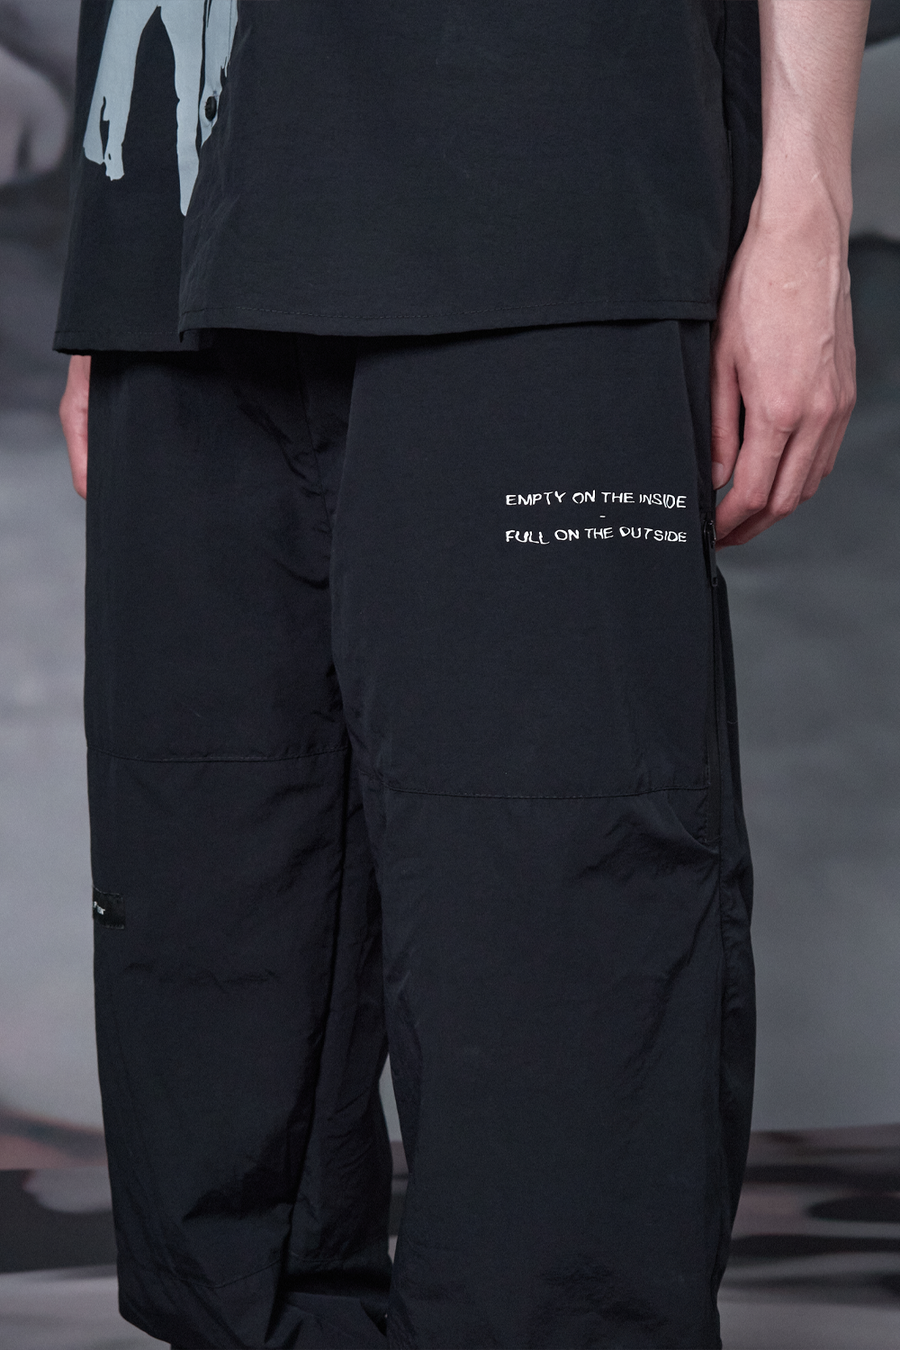 Buy the Iso Poetism Penon Base Pants W/ Elasticated Waist & Hems in Black at Intro. Spend £100 for free UK delivery. Official stockists. We ship worldwide.